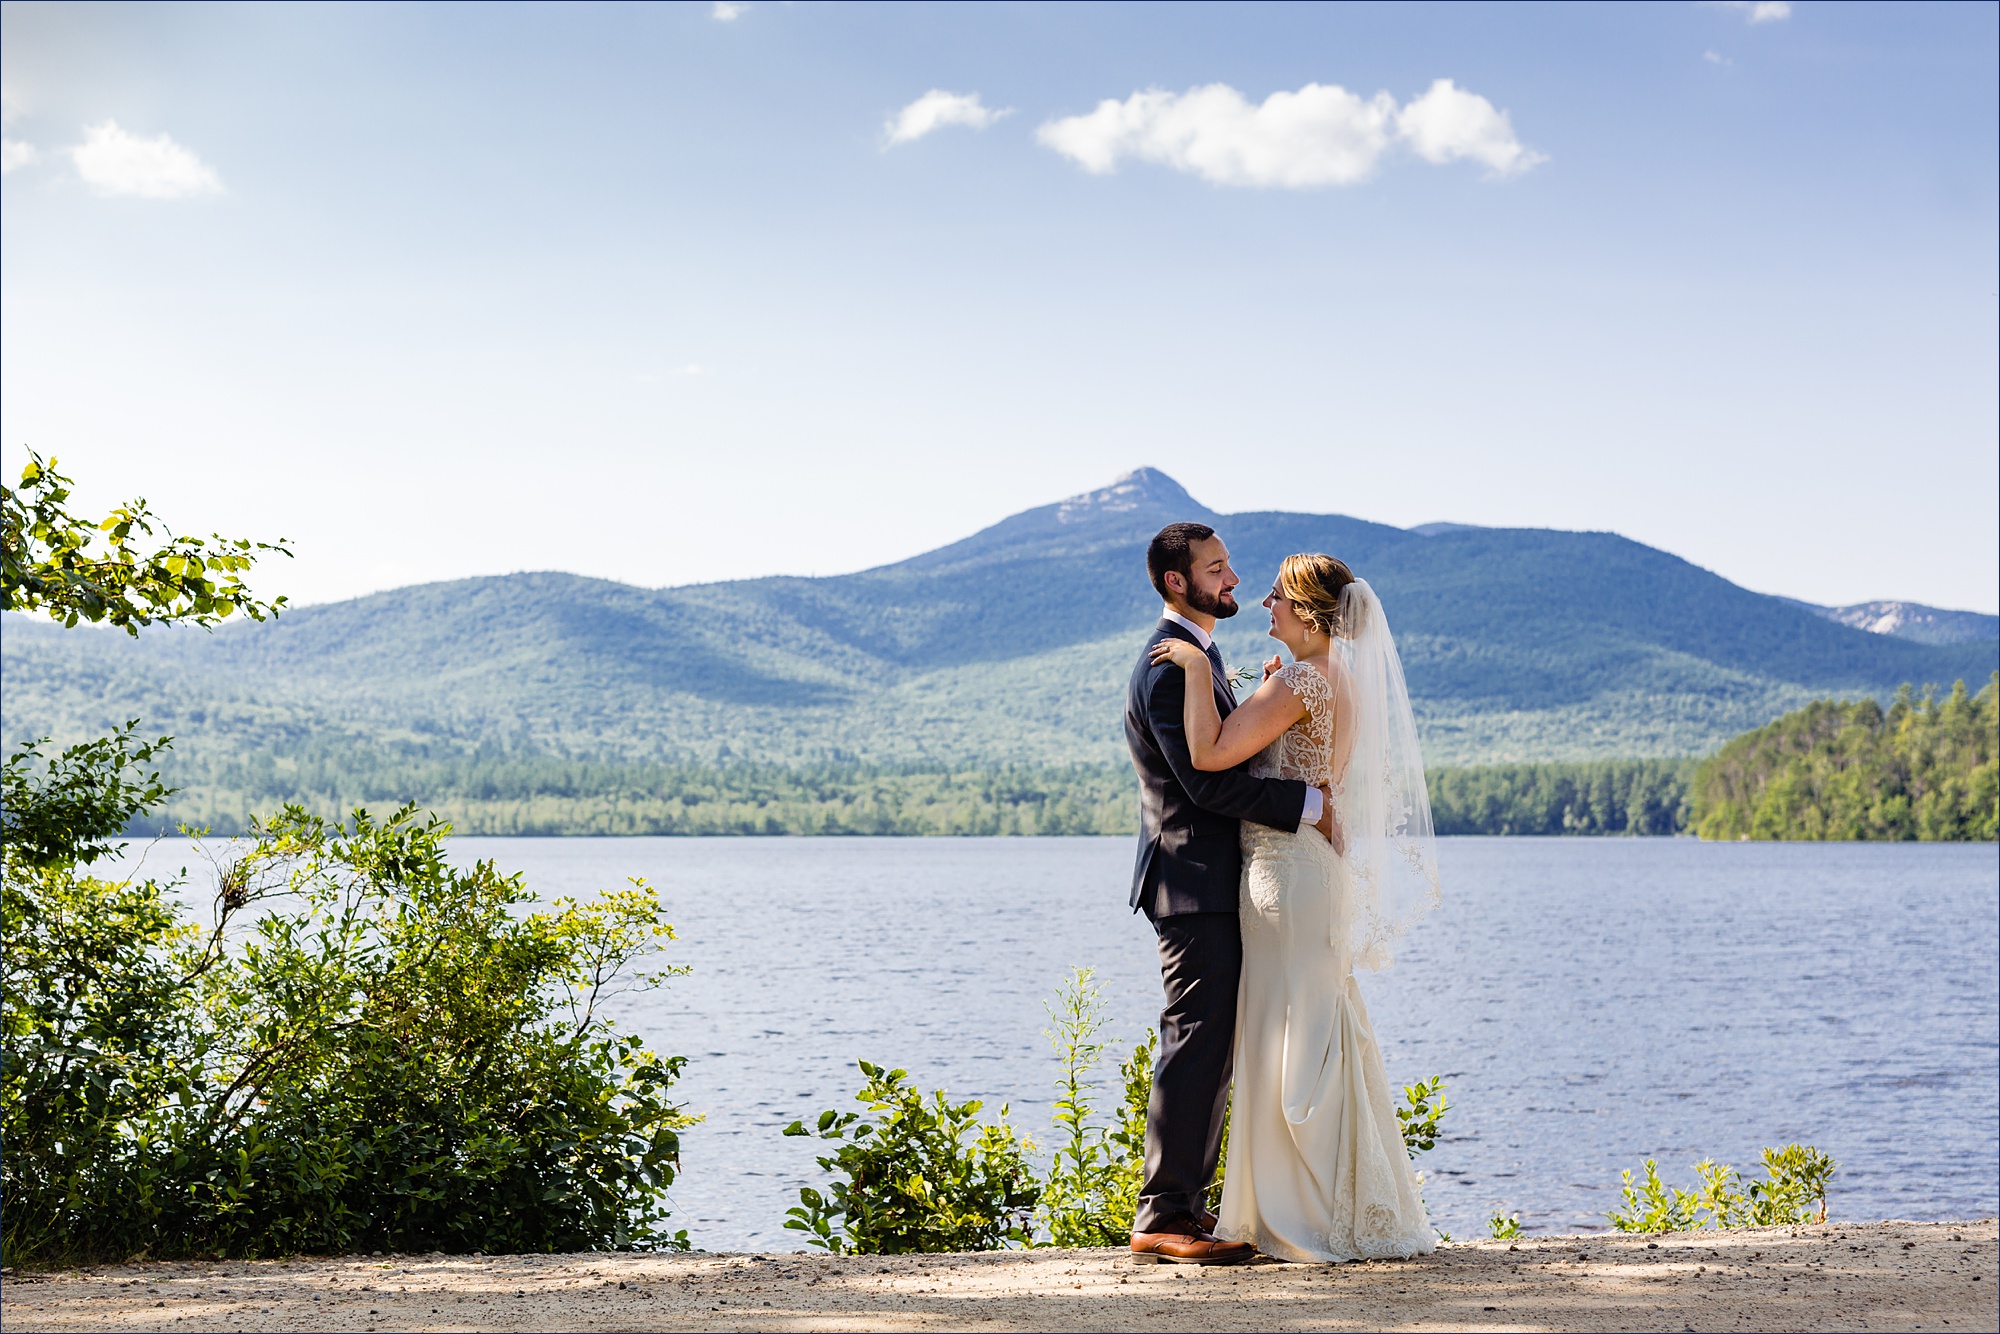 The bride and groom get close to one another in front of Mount Chocorua and Chocorua Lake in New Hampshire